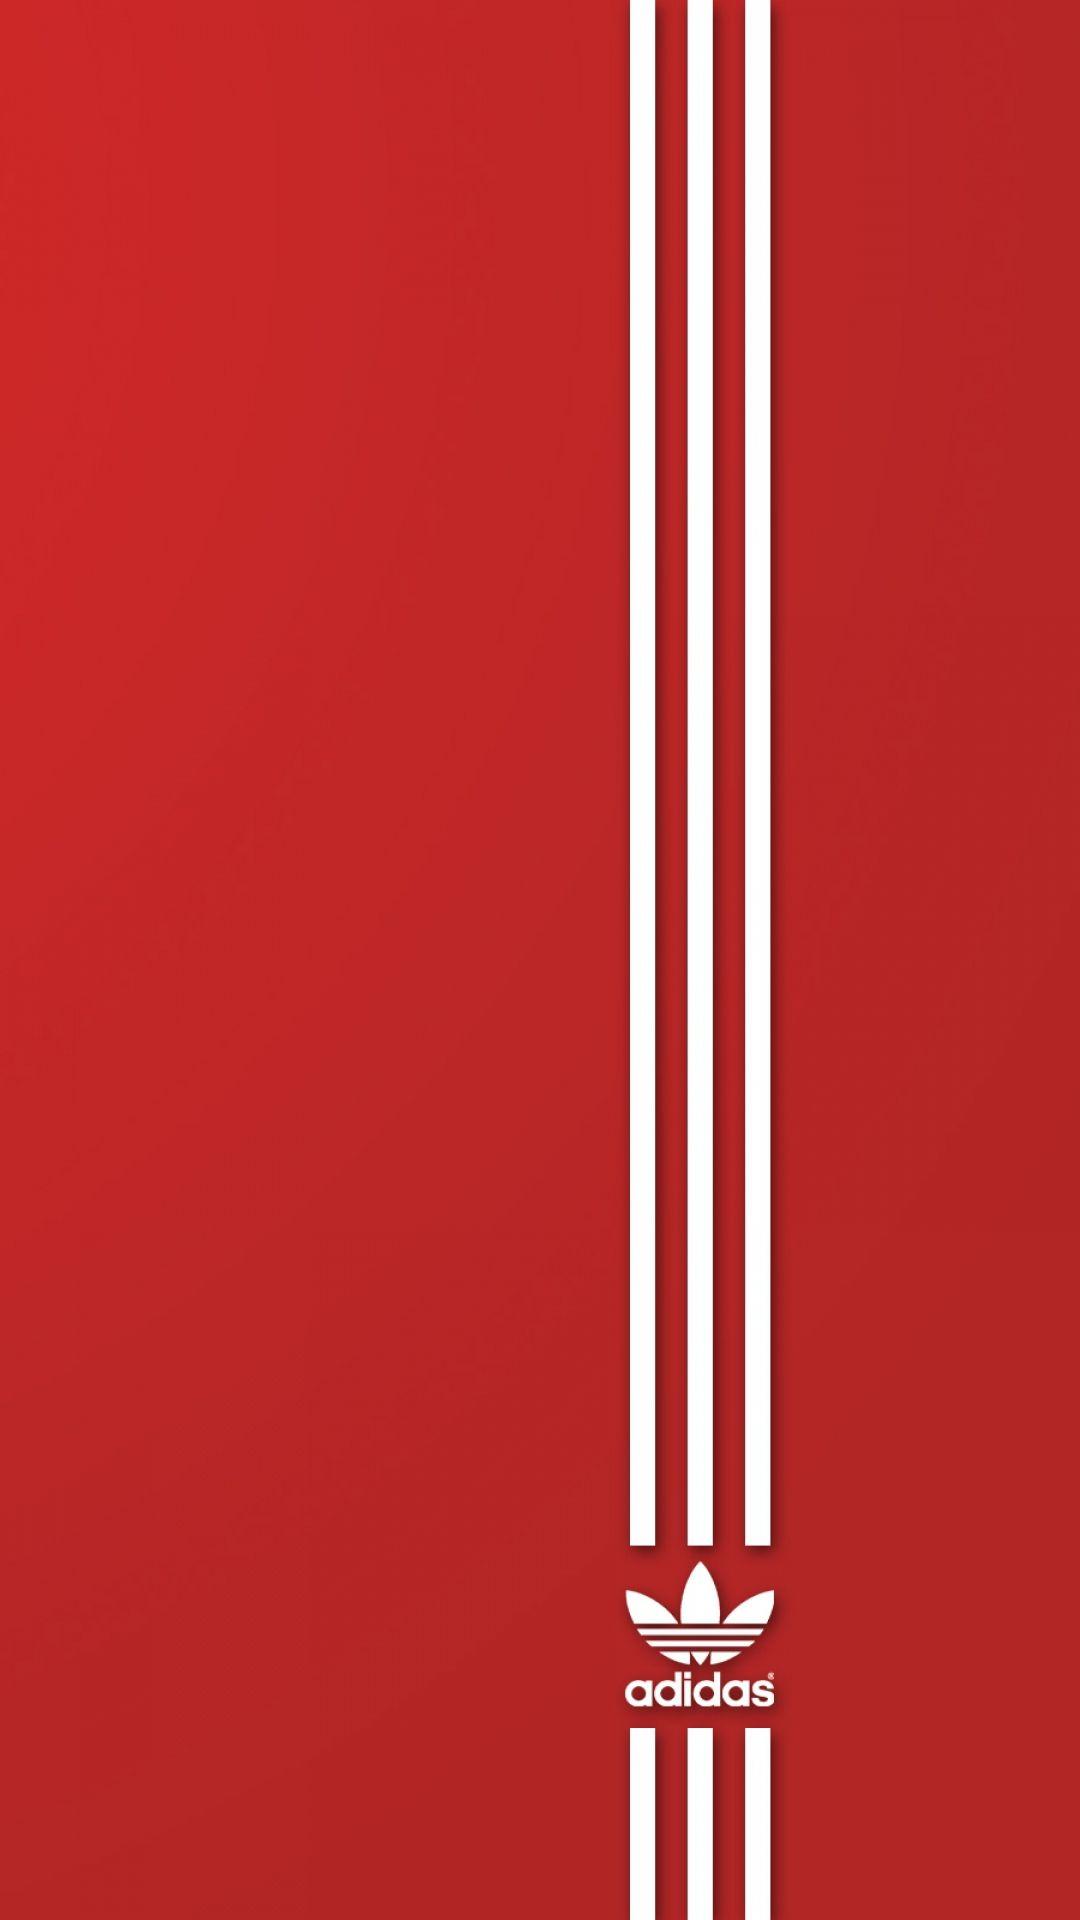 Red and White Sports Logo - Download Adidas Red and White Color Logo Symbol Wallpaper ...